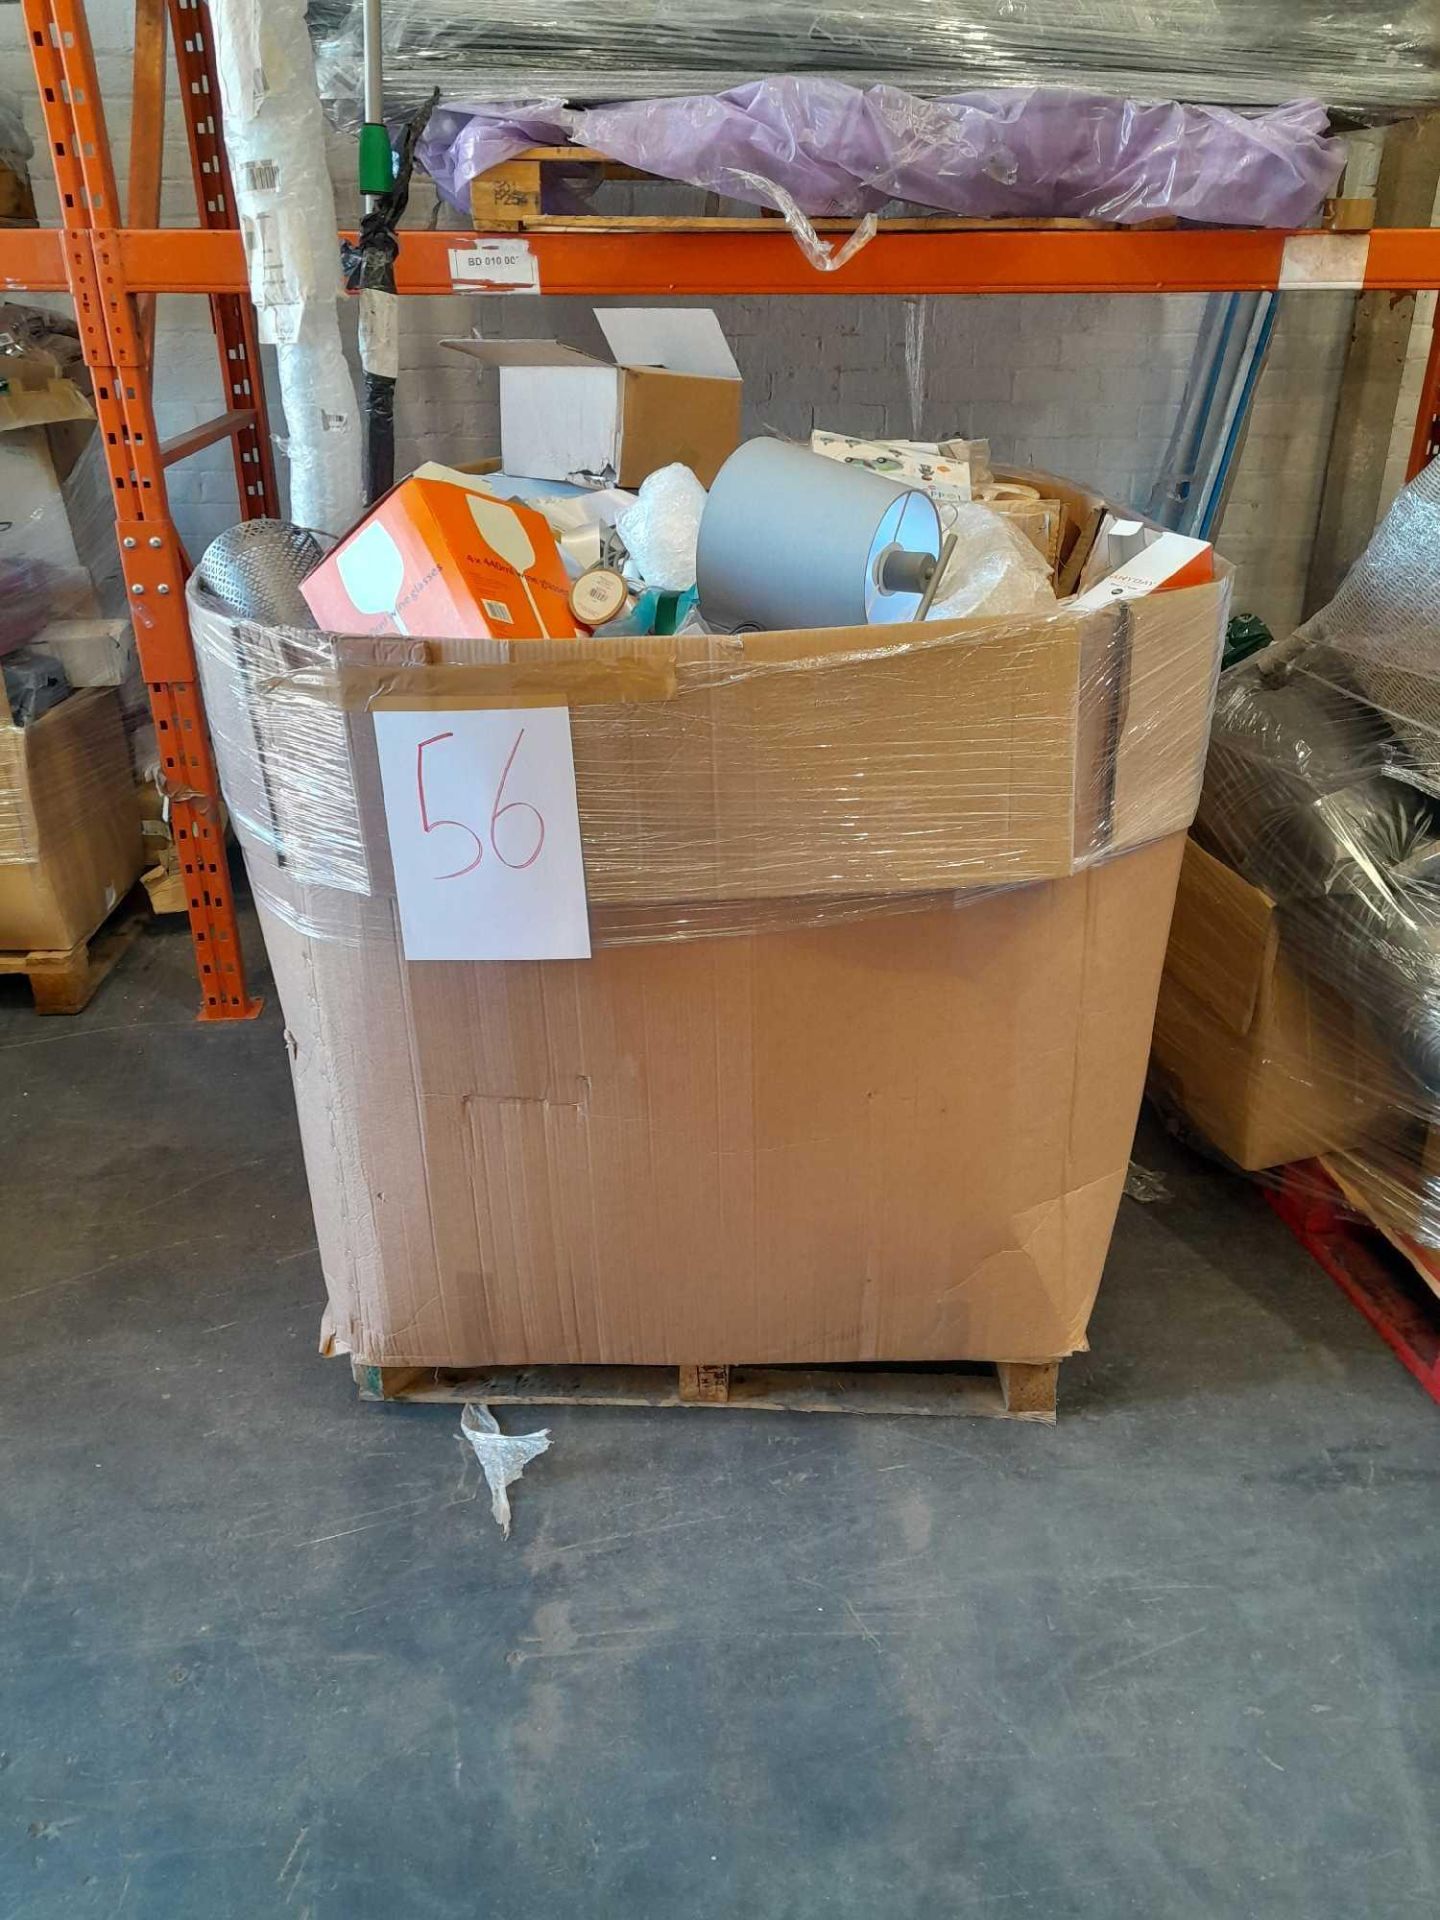 RRP £2,290 Pallet To Contain Assorted Items Such As Picture, Lamp, And Much More.